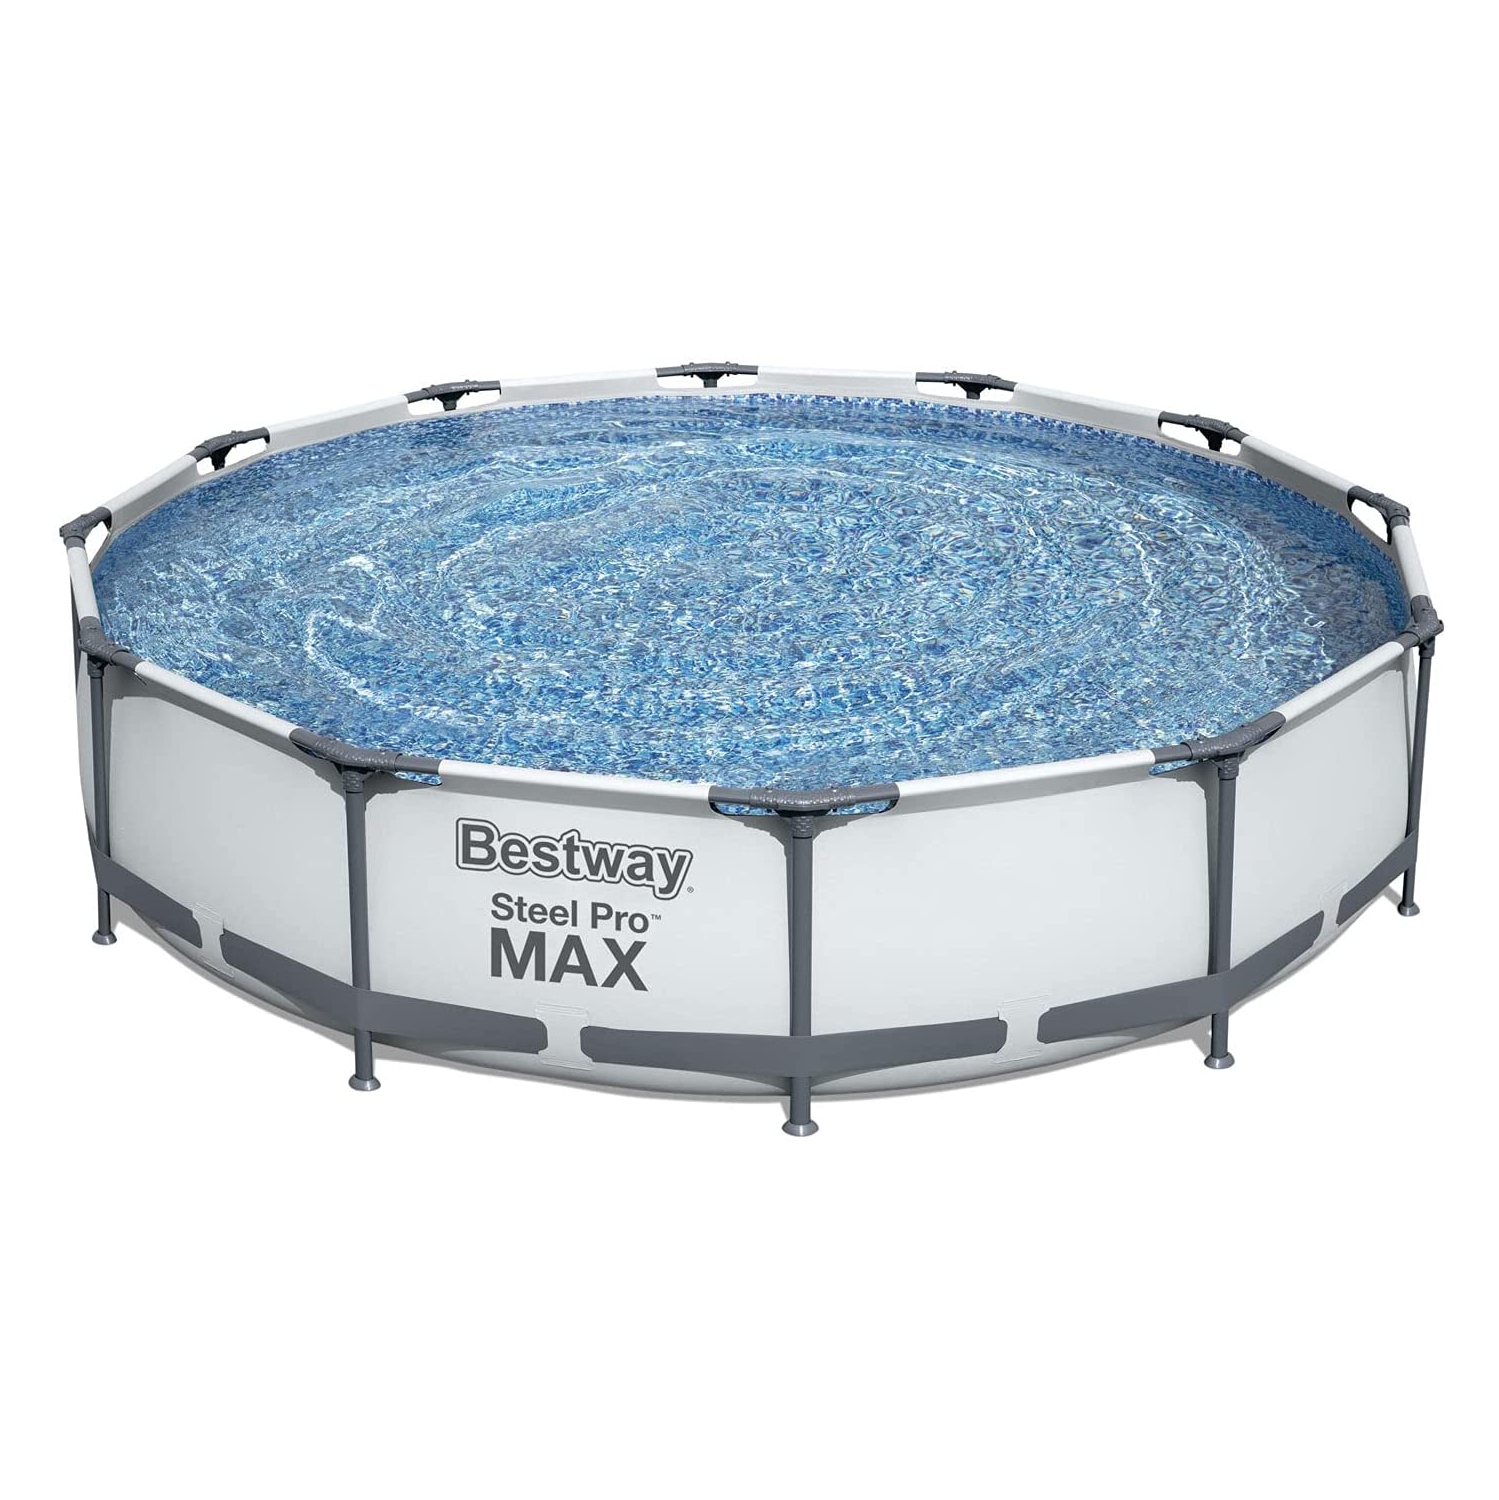 Bestway Steel Pro 12' x 30" Frame Pool Set with filter and pump